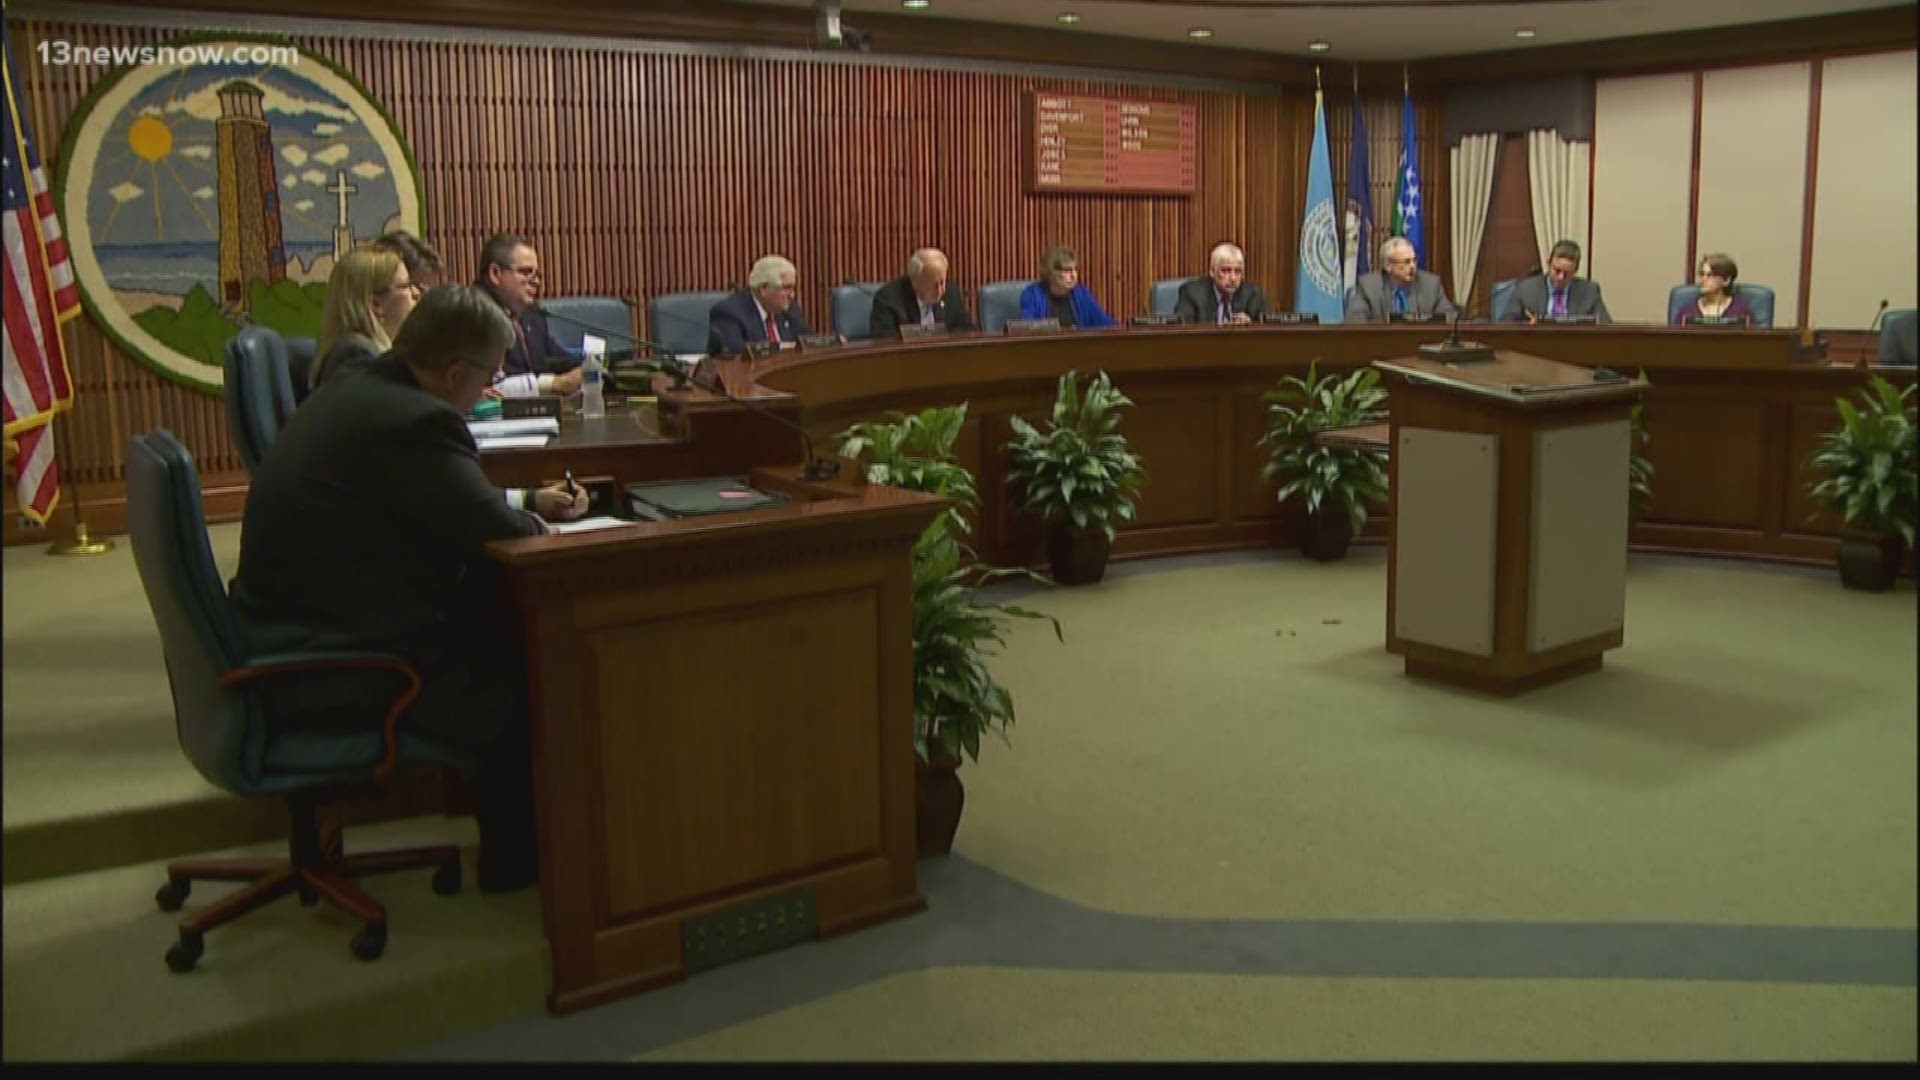 Mayor Will Sessoms was in his last meeting as leader of the city.